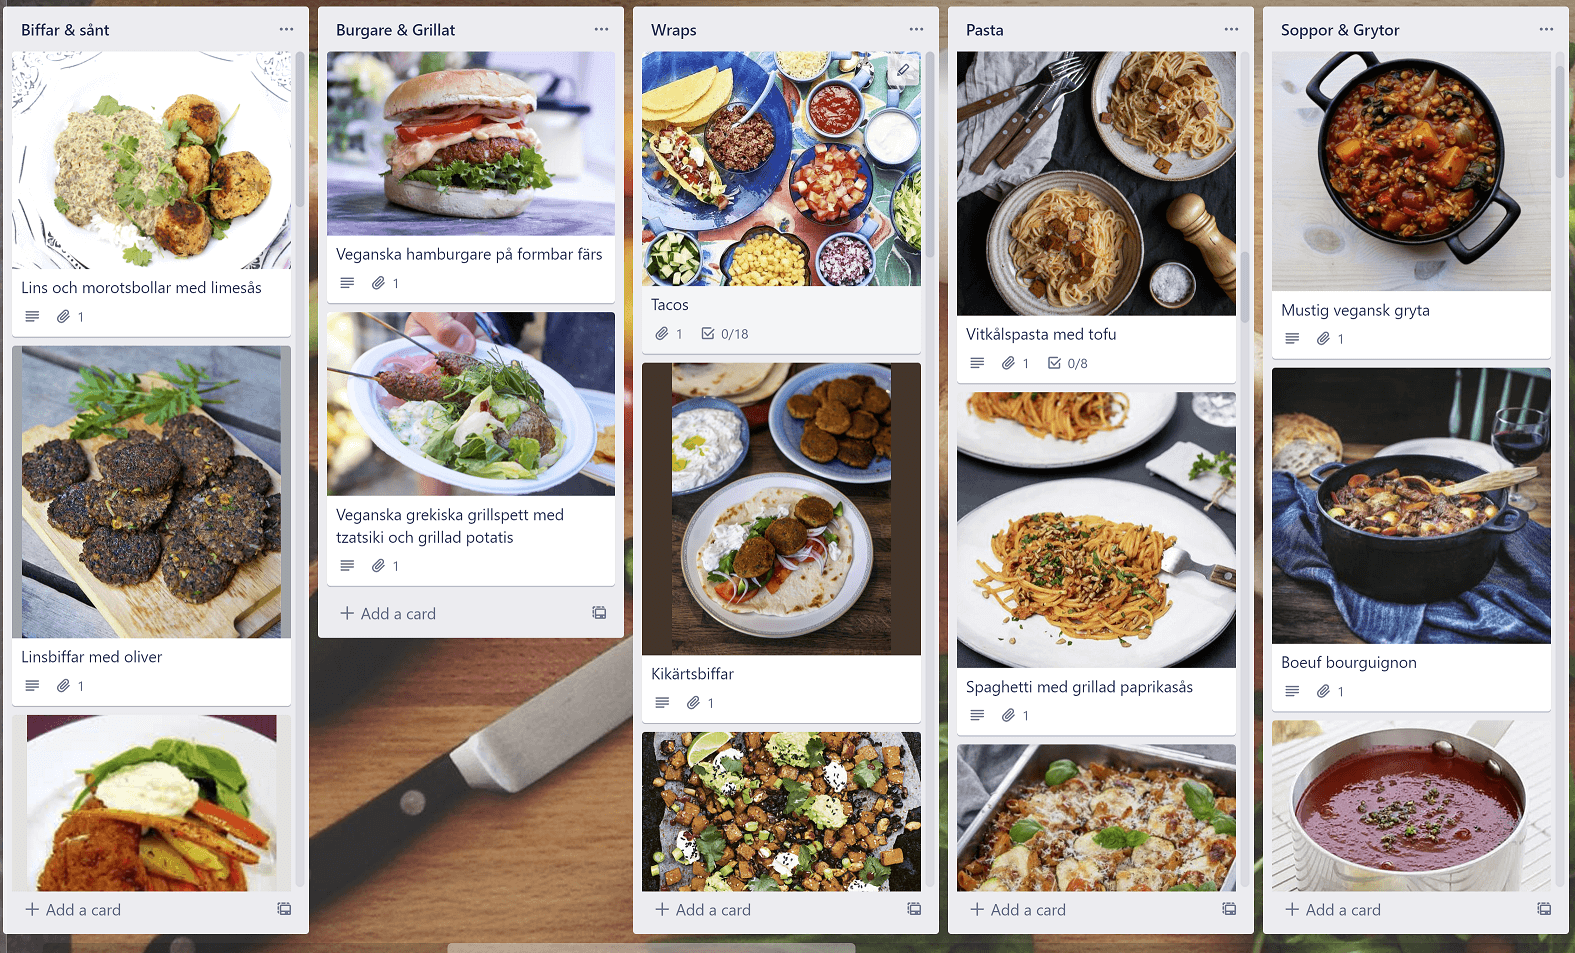 Trello board with recipe lists for different types of dishes